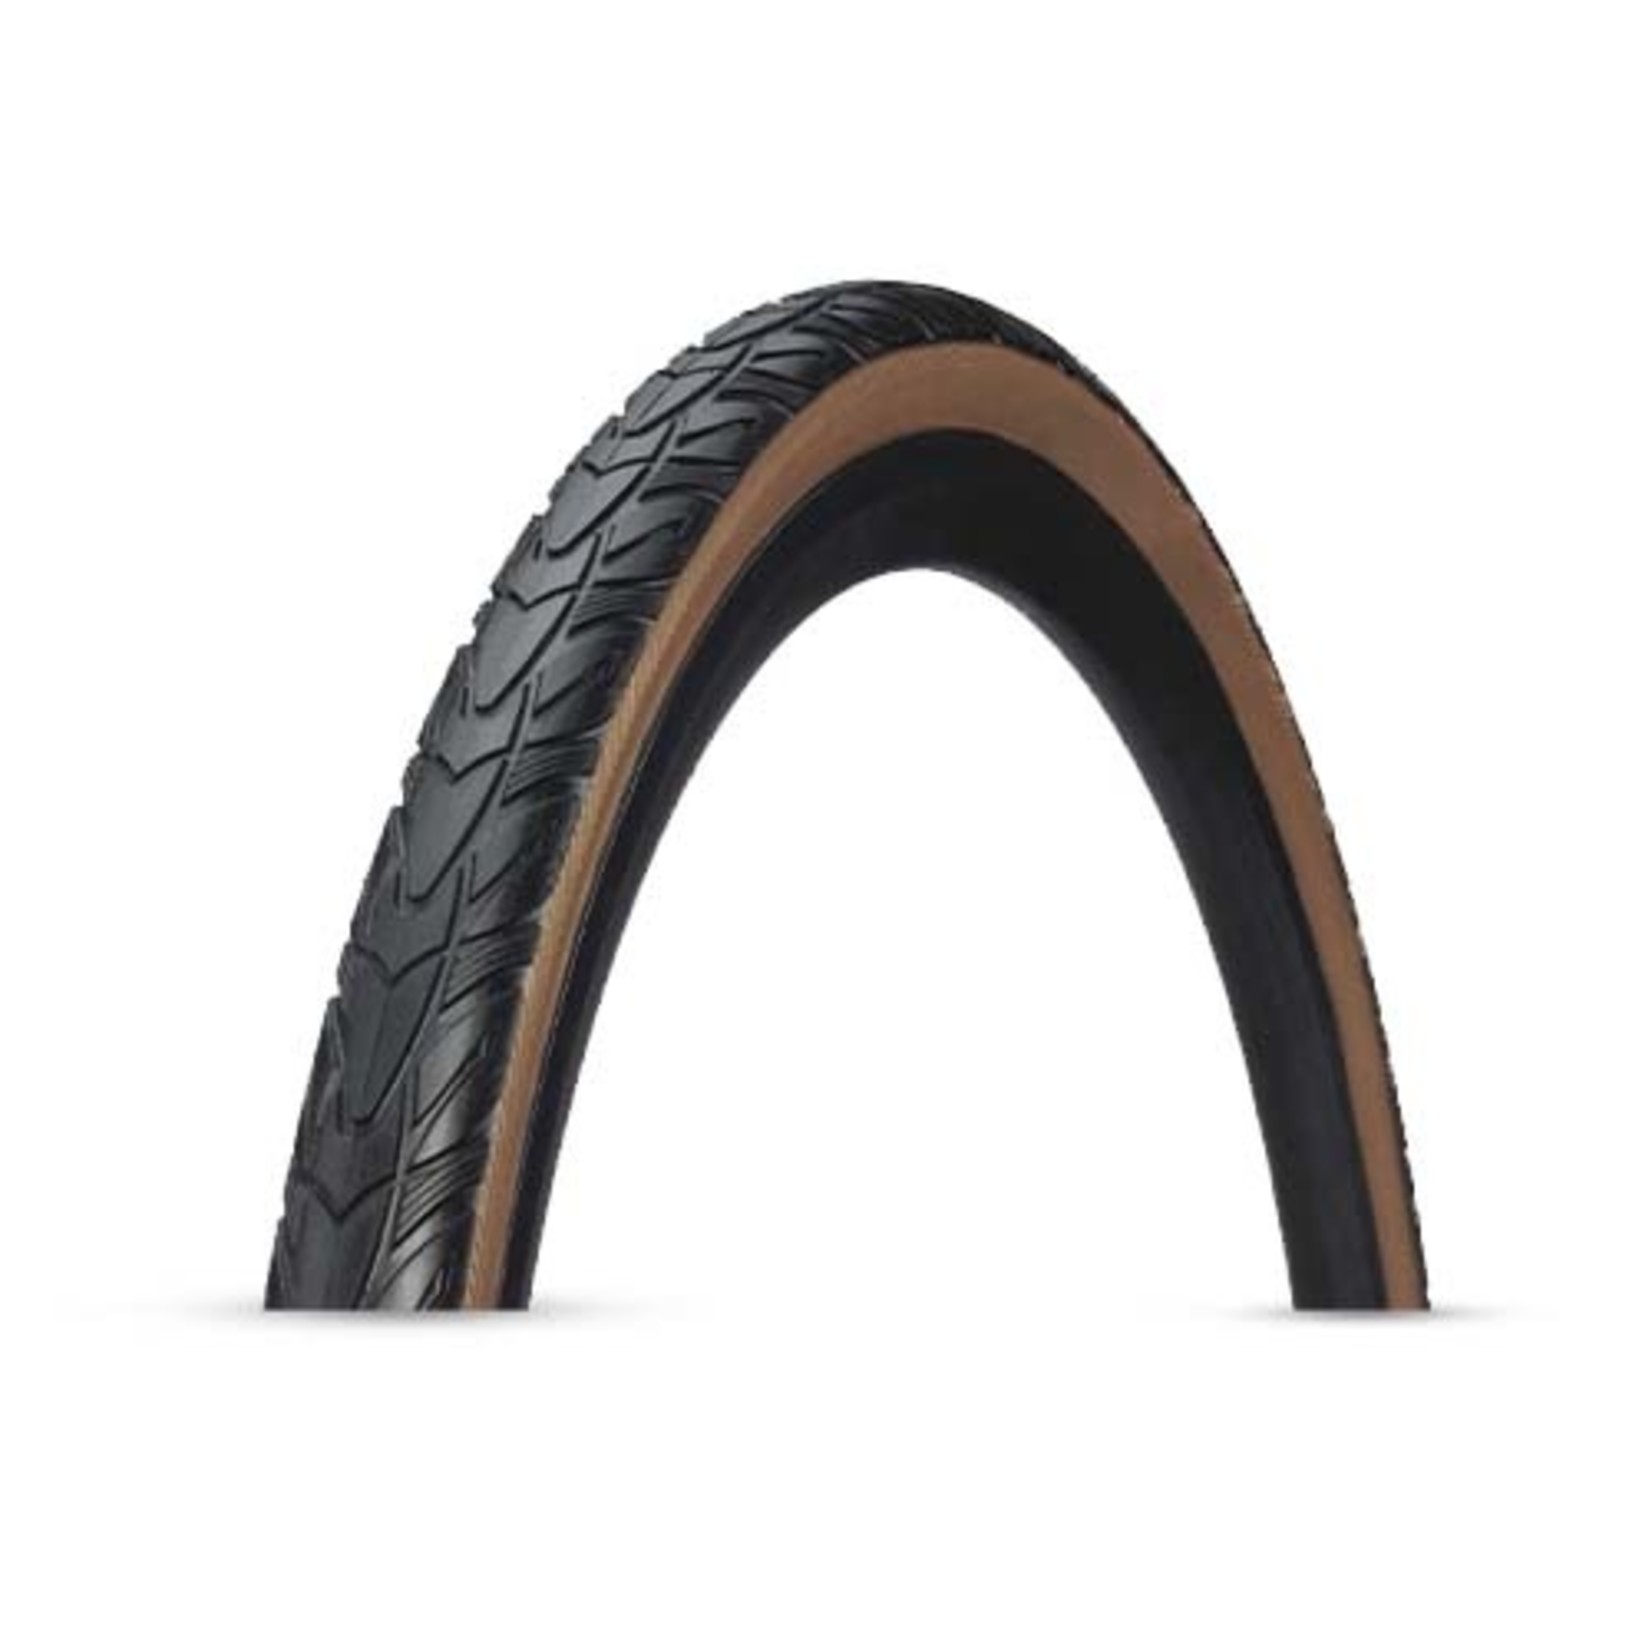 TRADITIONAL AMBER WALL TYRE 700X28C